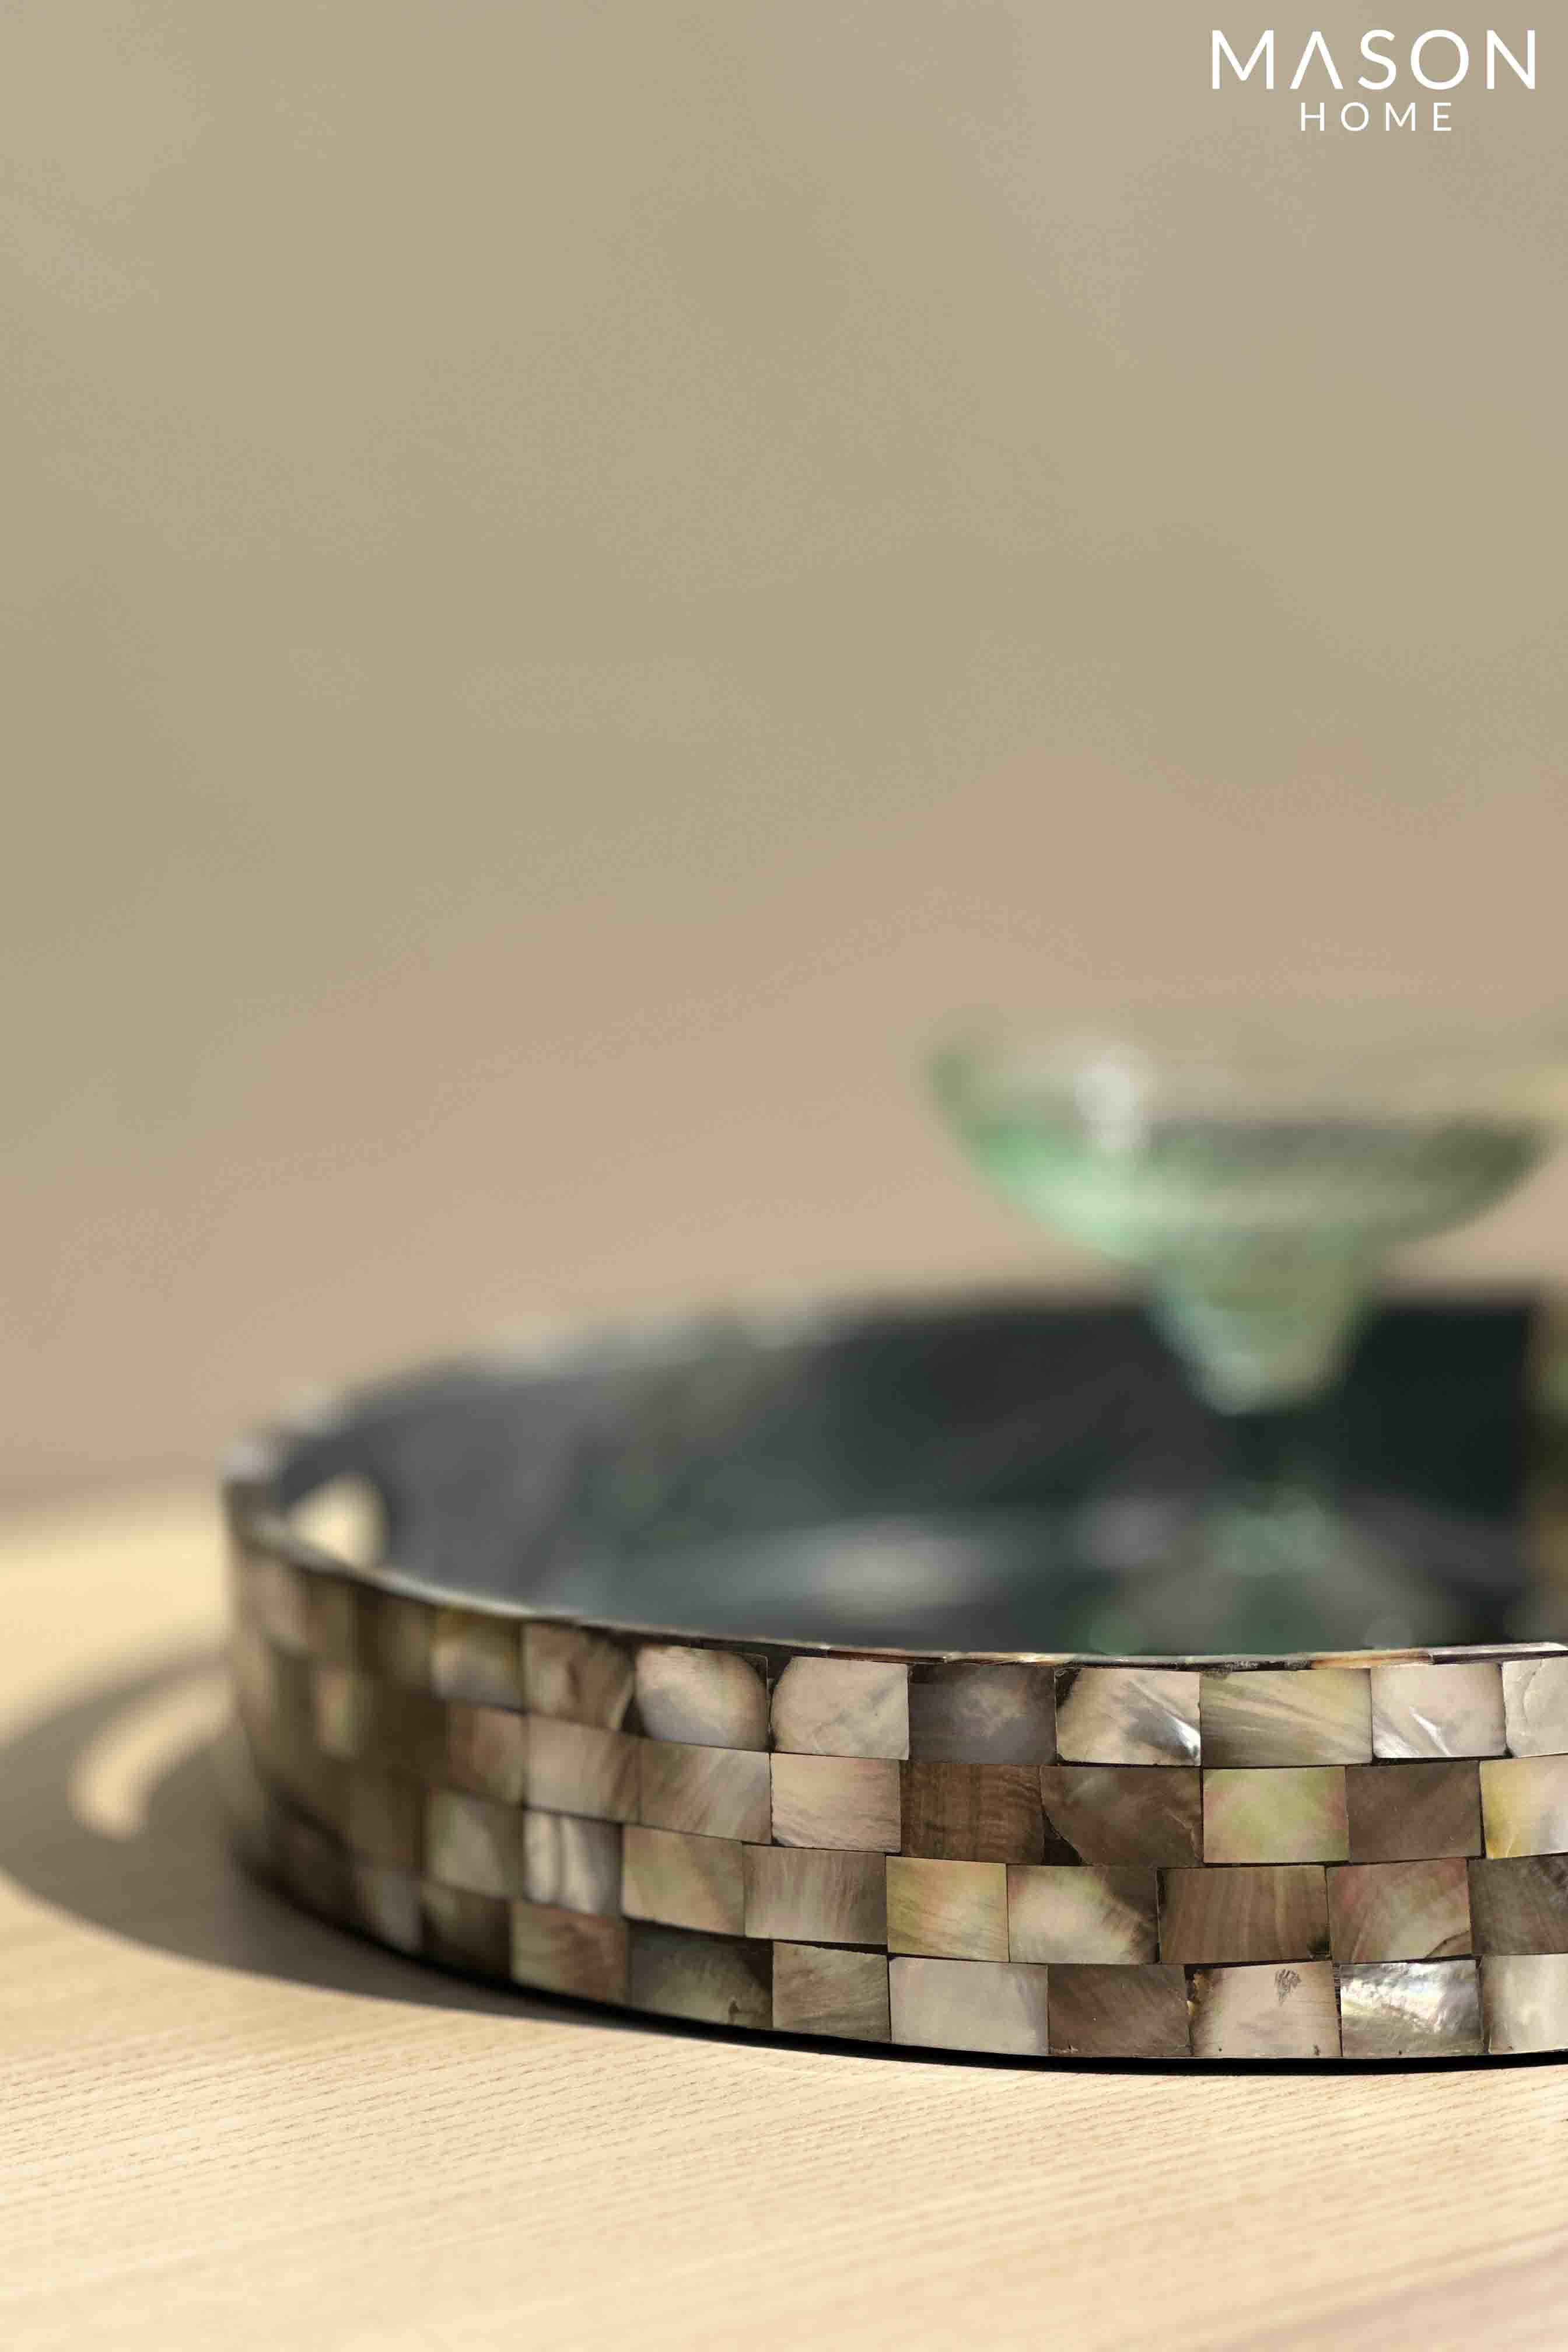 Black Mother Of Pearl Round Tray  - Medium